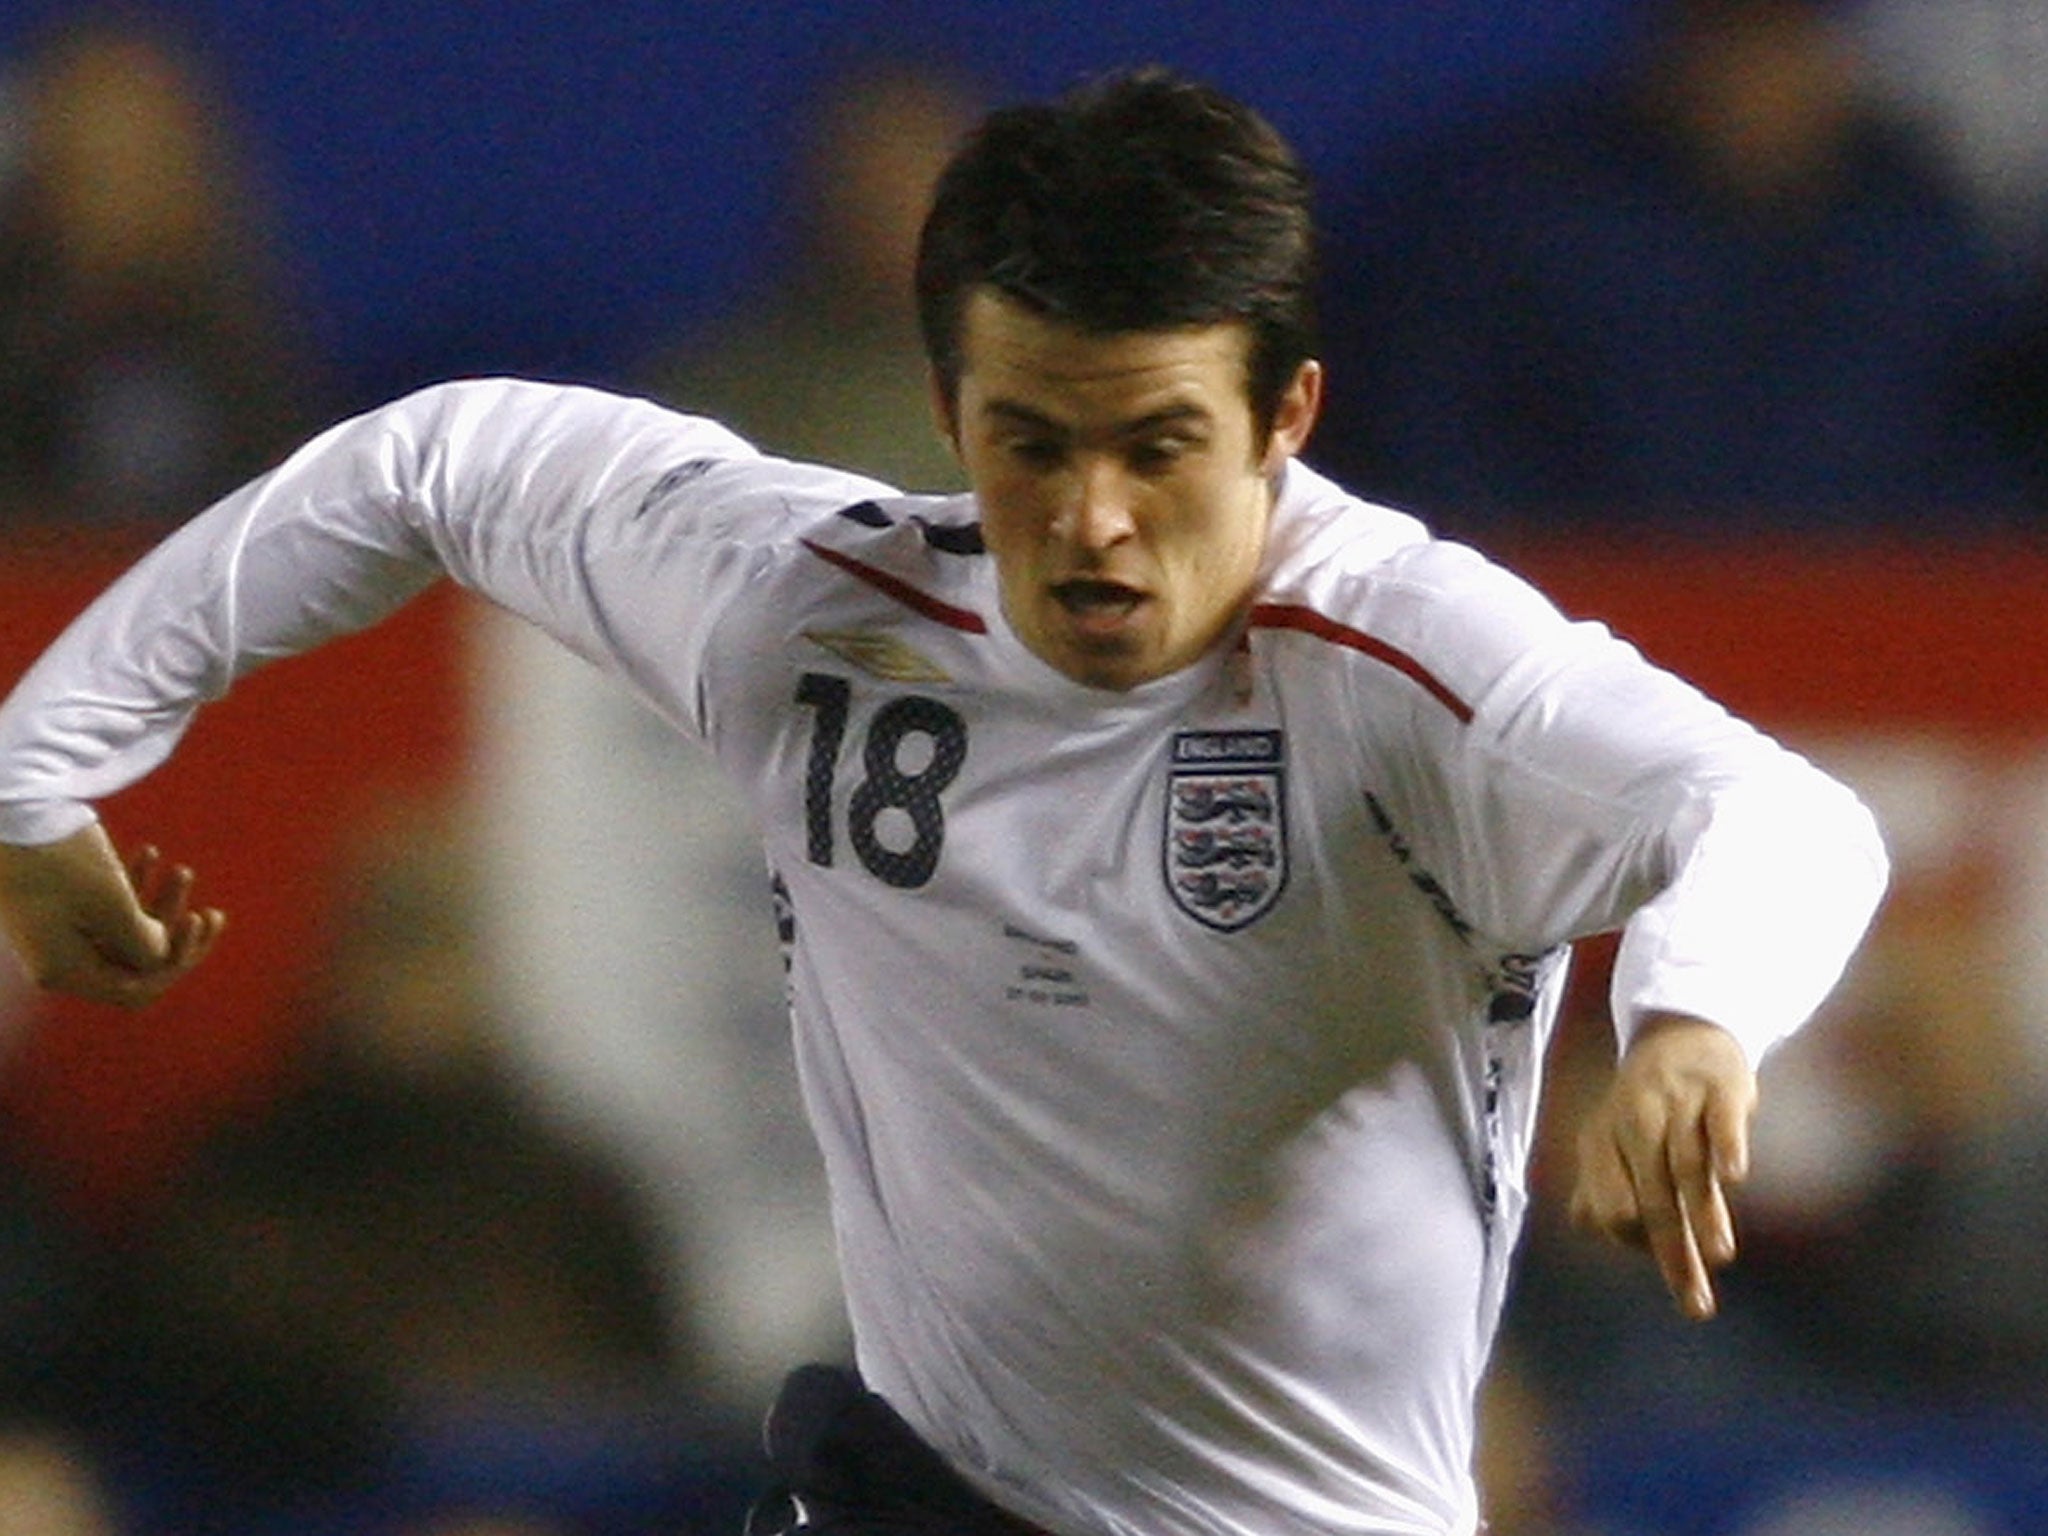 Joey Barton in action during his sole England appearance, in the 1-0 defeat by Spain at Old Trafford in February 2007